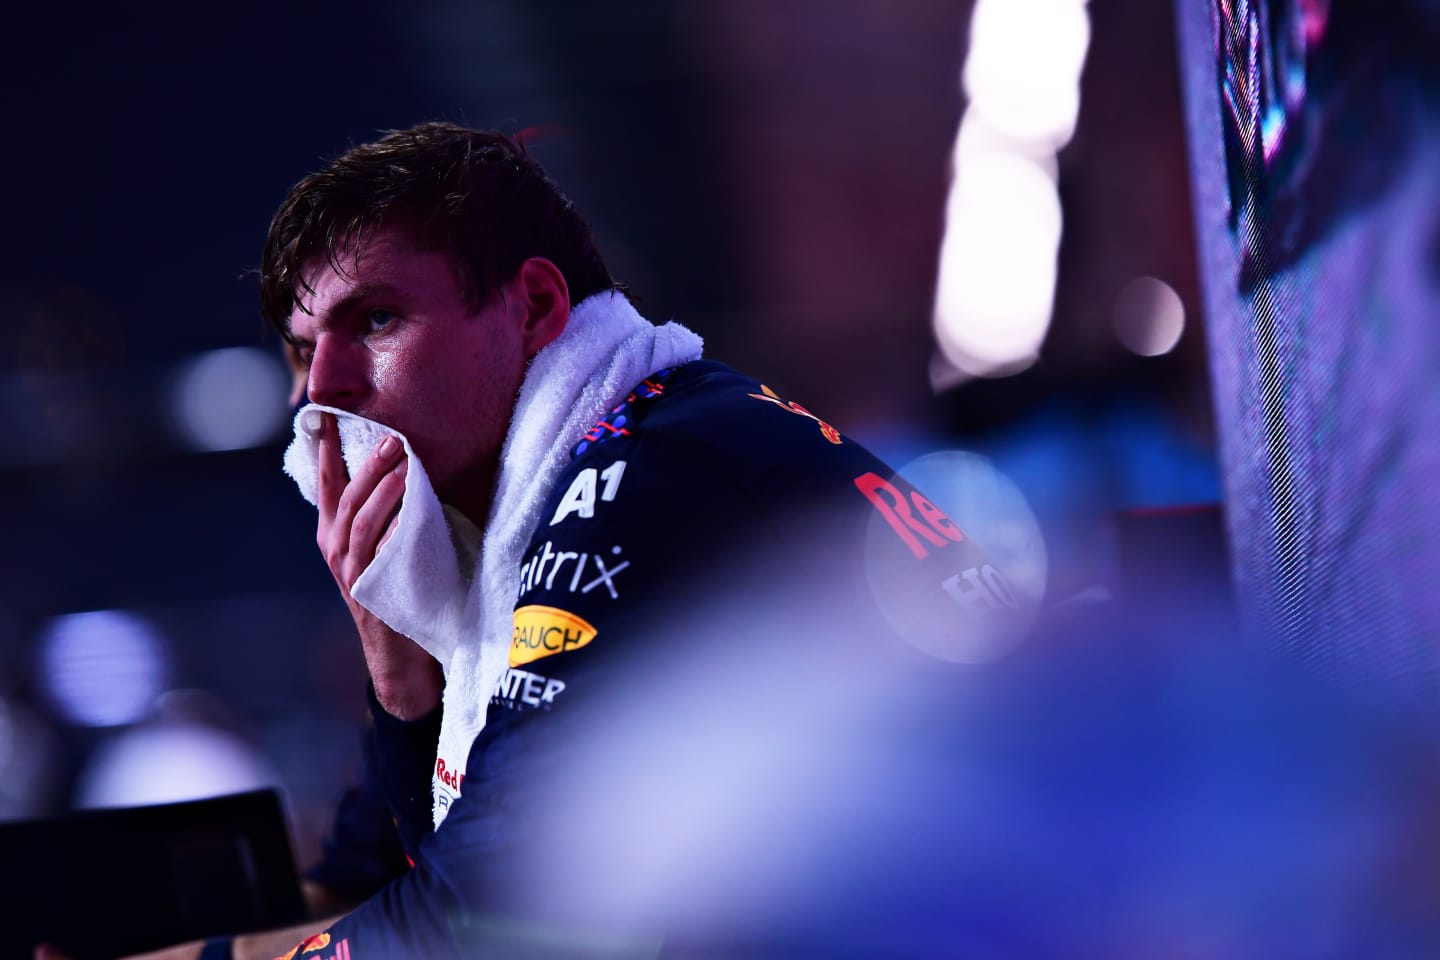 JEDDAH, SAUDI ARABIA - DECEMBER 05: Second placed Max Verstappen of Netherlands and Red Bull Racing looks on in parc ferme during the F1 Grand Prix of Saudi Arabia at Jeddah Corniche Circuit on December 05, 2021 in Jeddah, Saudi Arabia. (Photo by Mario Renzi - Formula 1/Formula 1 via Getty Images)